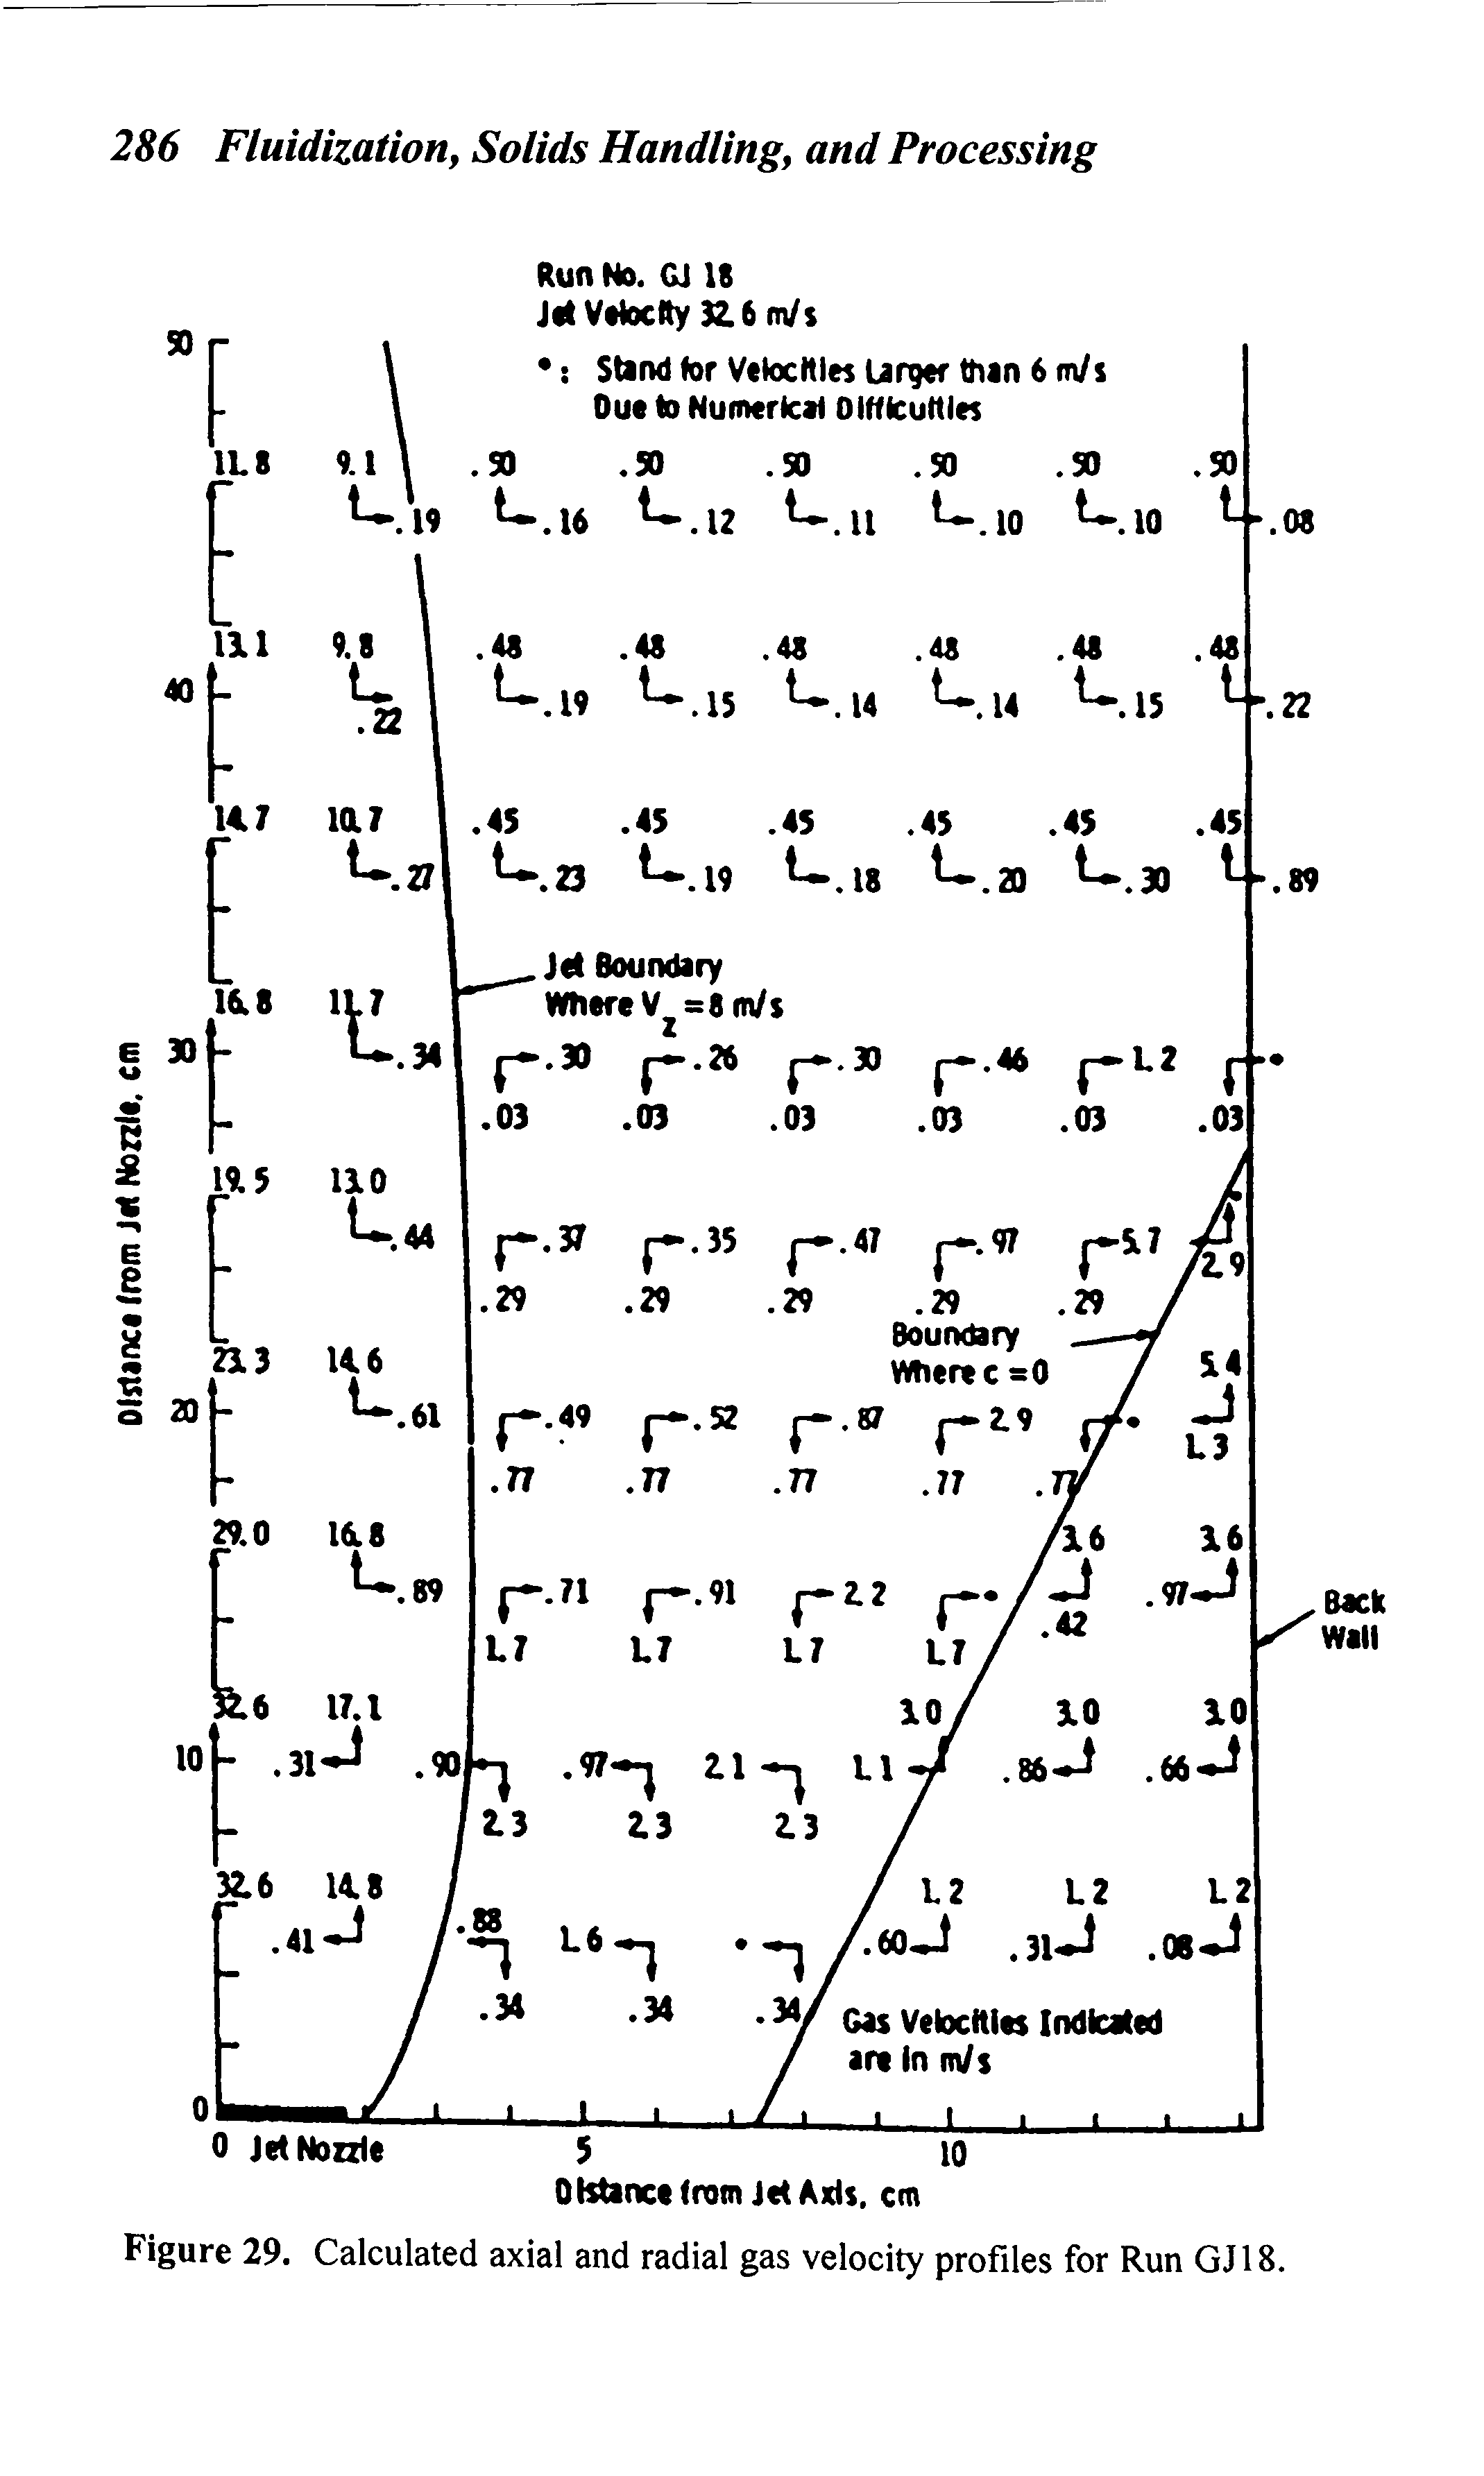 Figure 29. Calculated axial and radial gas velocity profiles for Run GJ18.